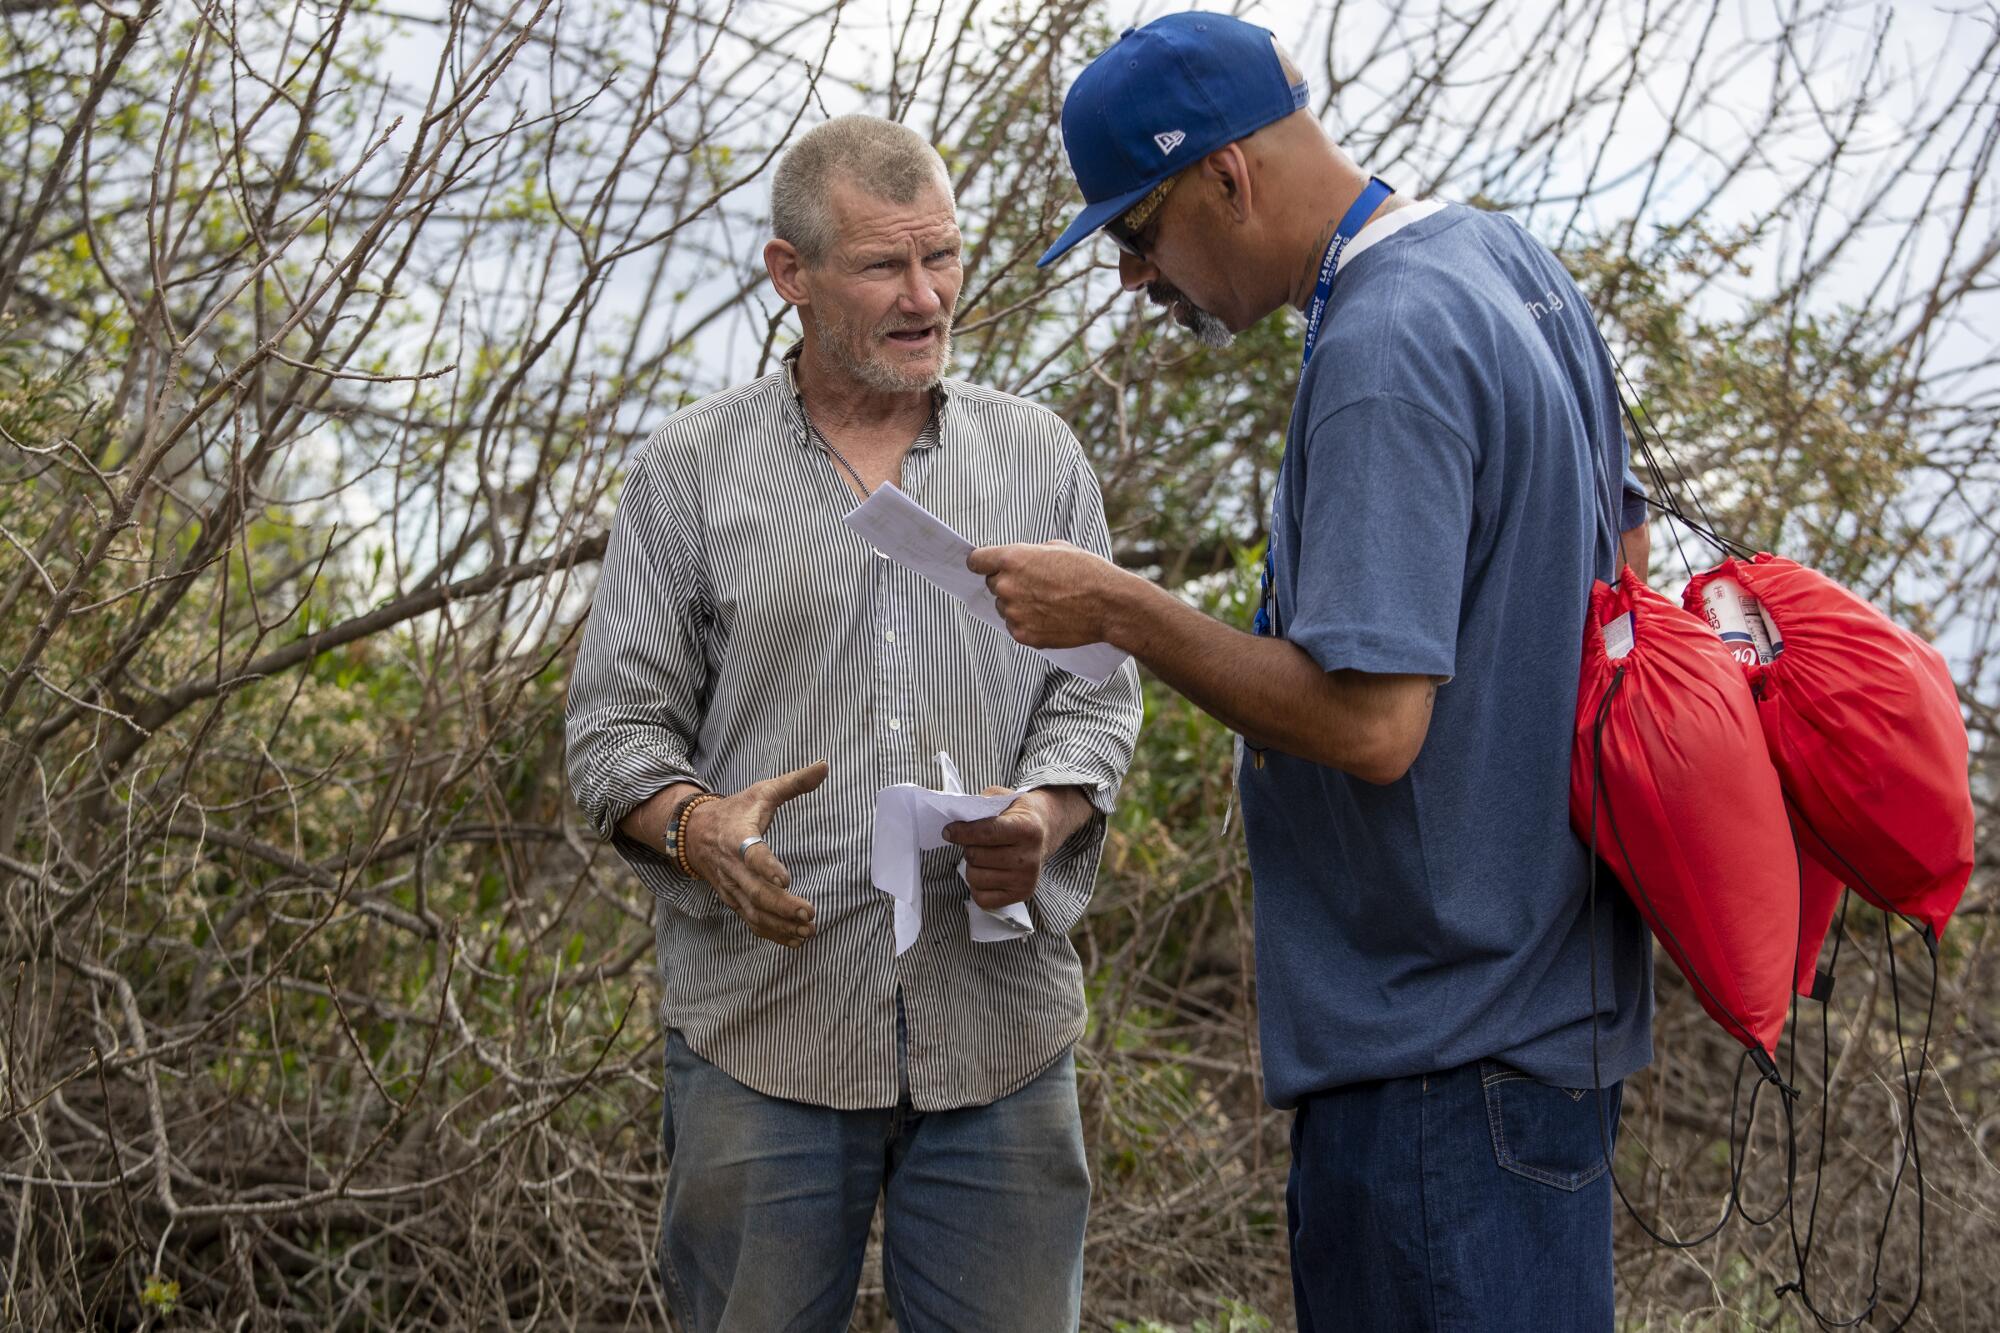 LA Family Housing outreach coordinator Eric Montoya, right, interviews homeless man Patrick Moran, who is camped in the Sepulveda Basin in Encino.